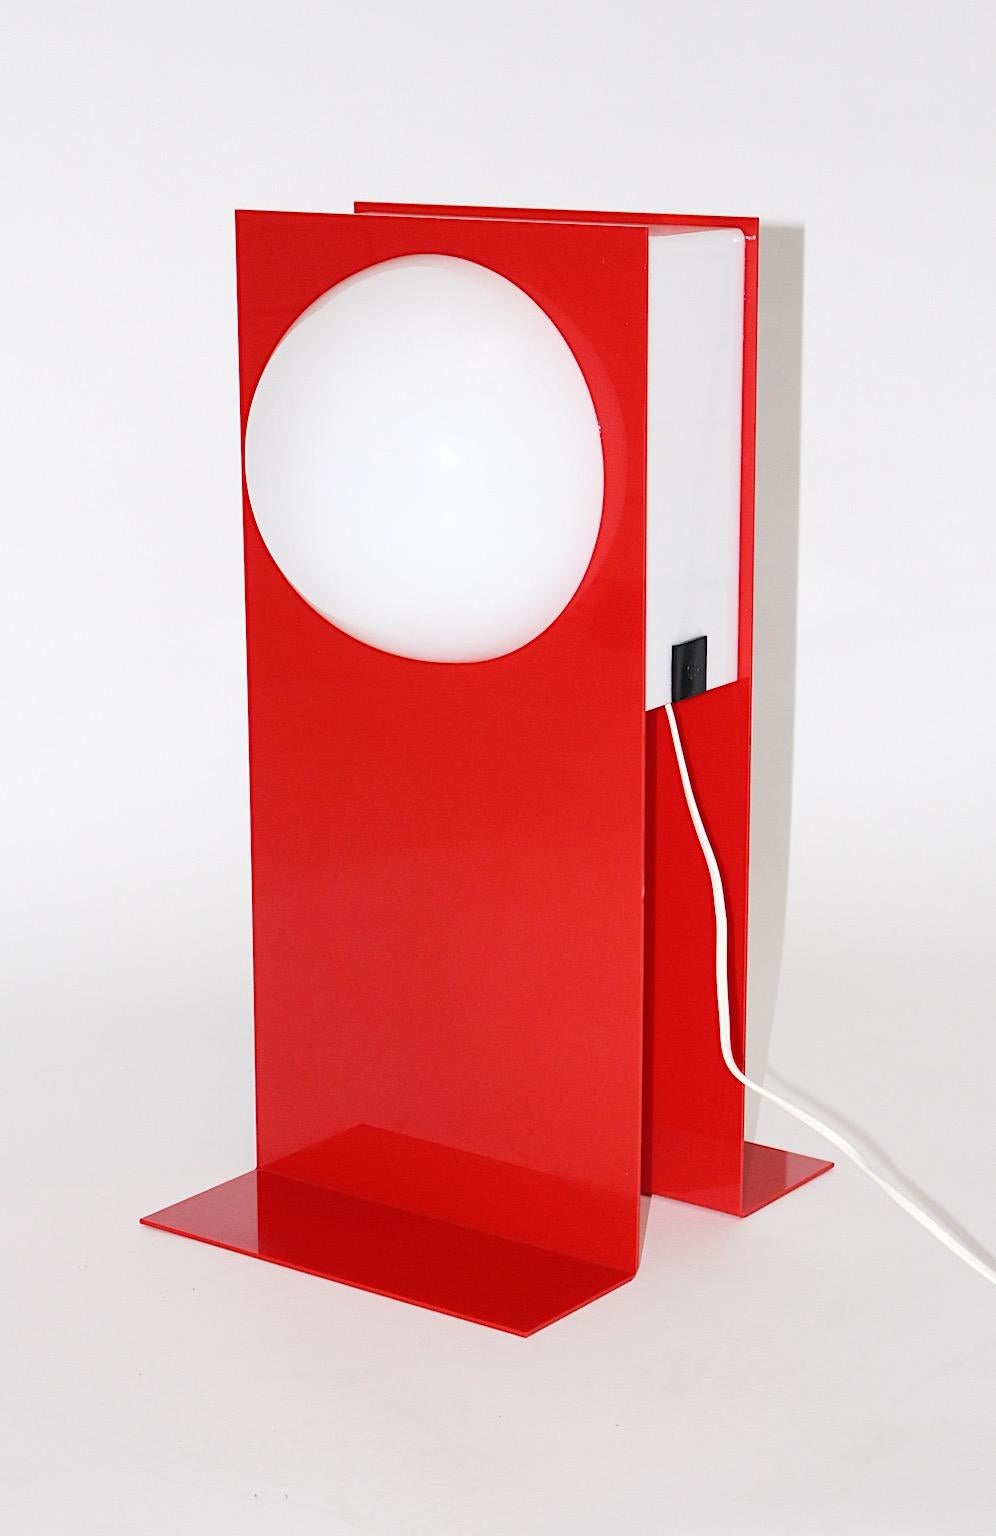 Postmodern style vintage table lamp from plastic in red and white color tones, 1980s.
A beautiful table lamp from plastic shows a signature with the initials HG, probably the initials of the artist. 
The upper part features a white dome on each